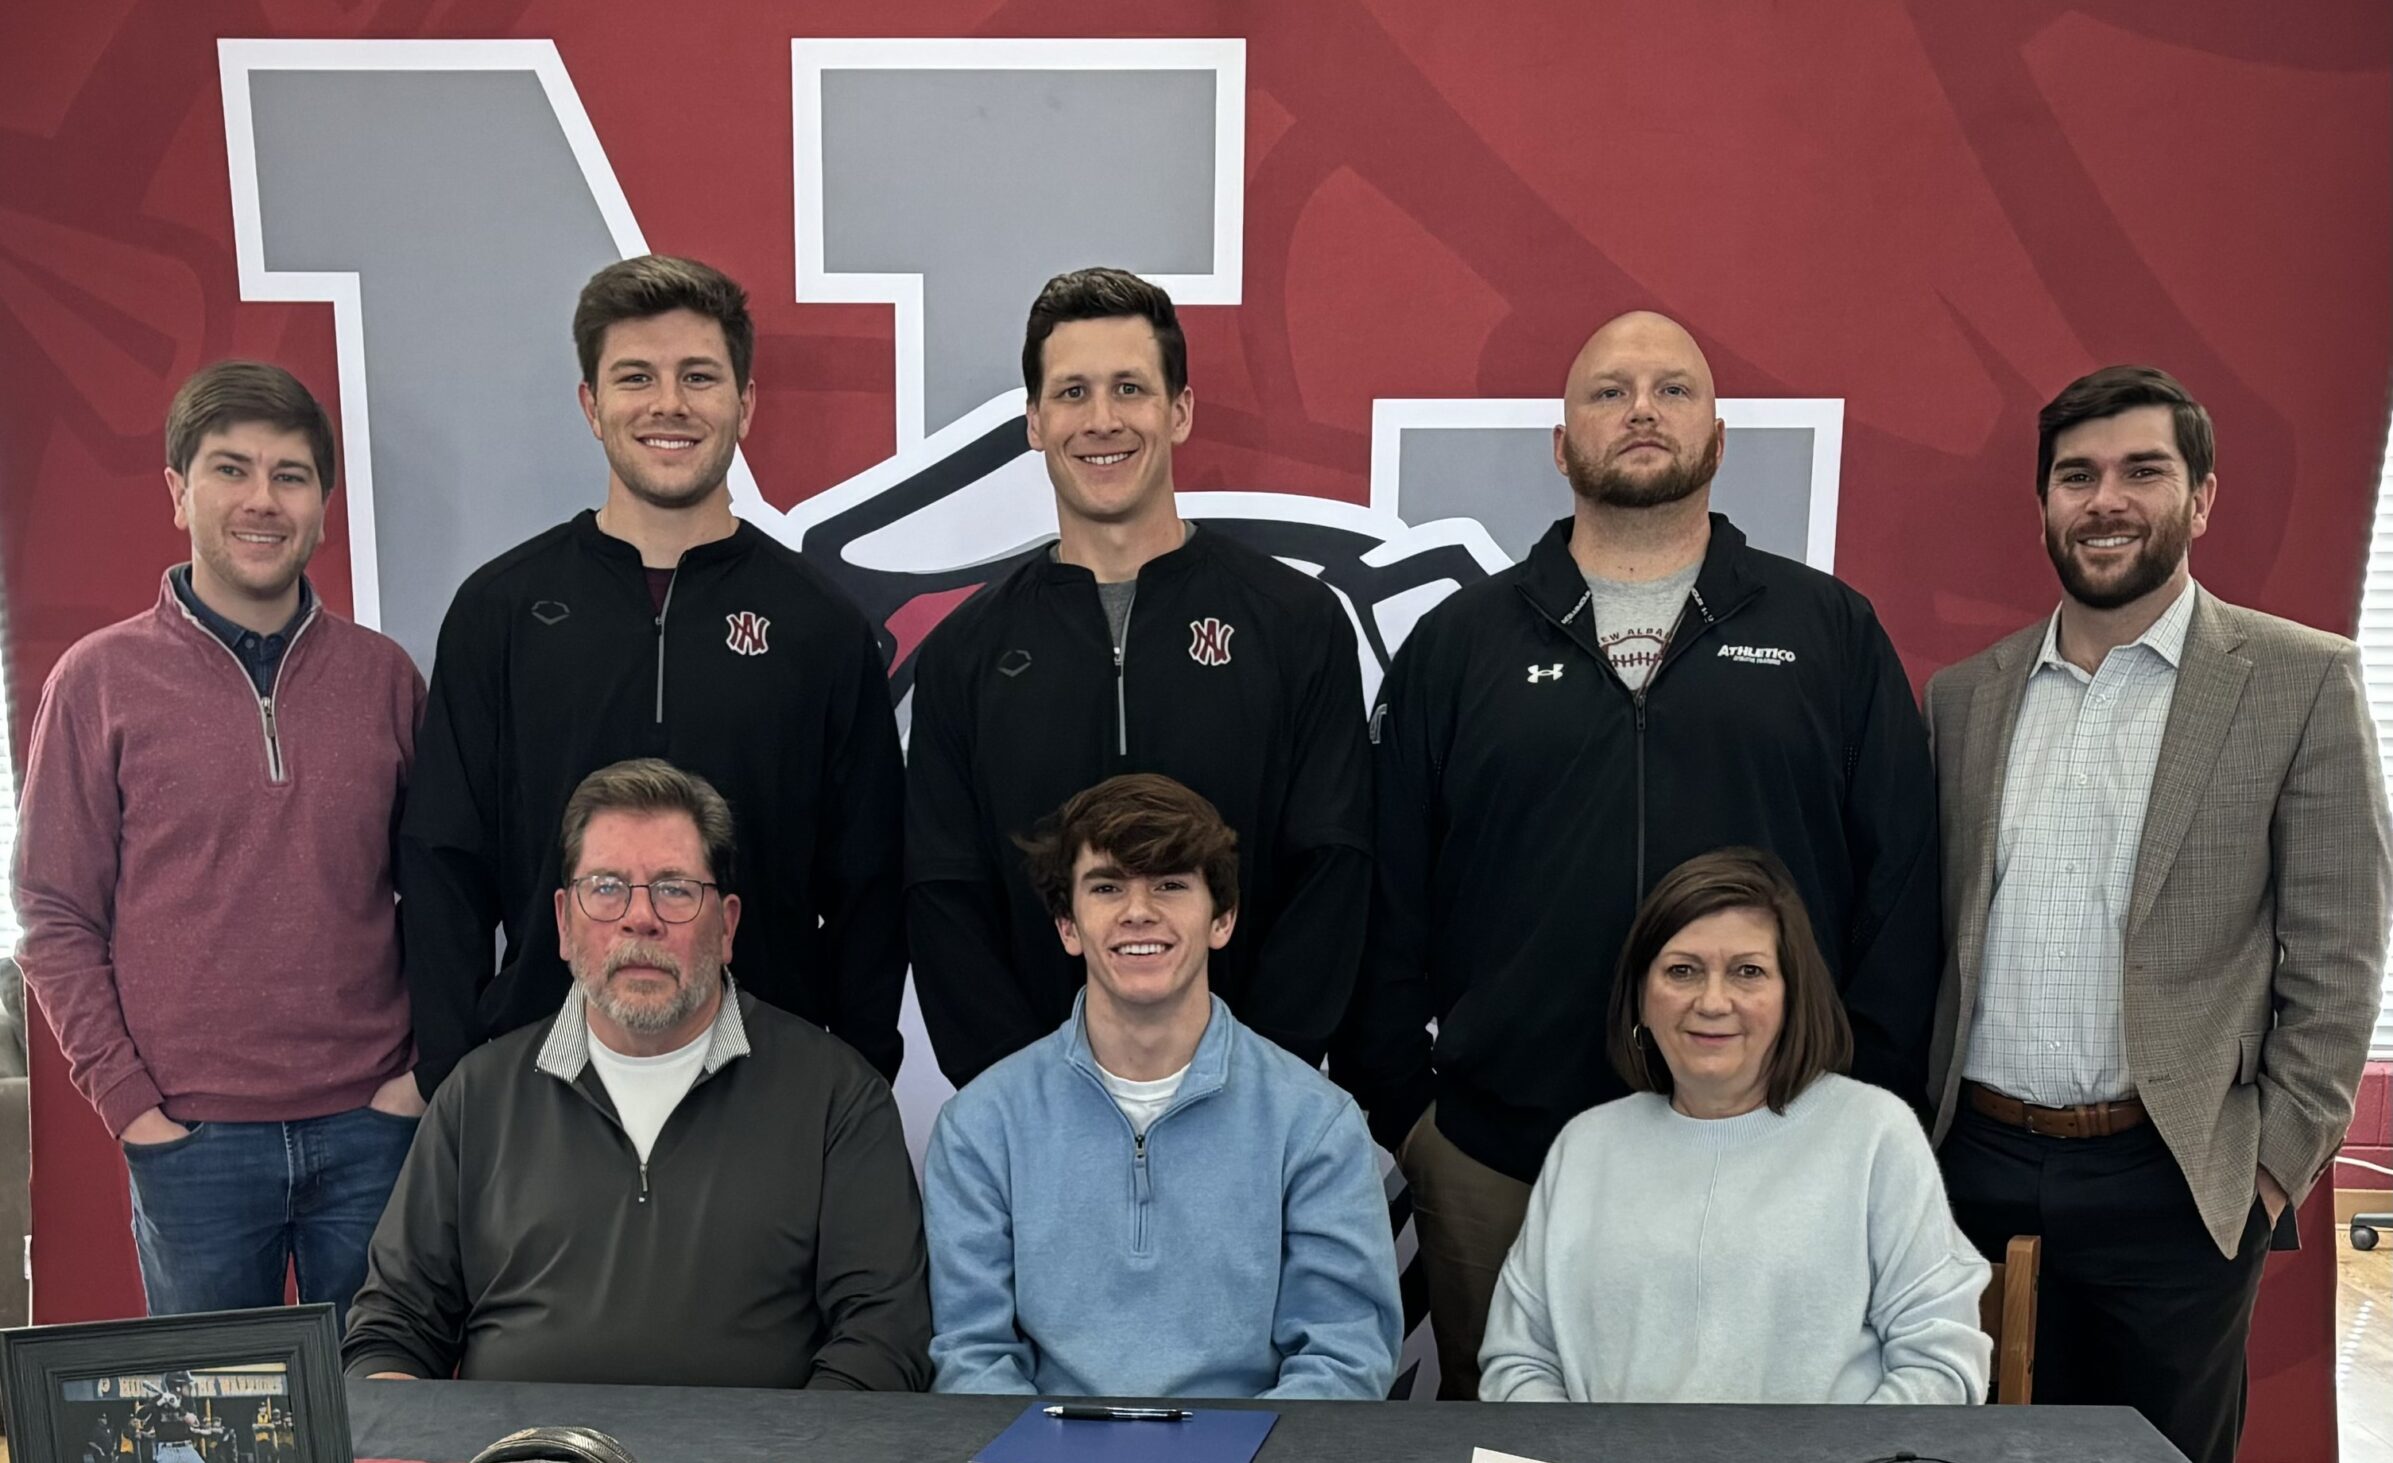 New Albany Bulldog Baseball Player Cooper Dodds signed to play baseball for Blue Mountain Christian University on Thursday, February 1. Pictured front row l-r:  Frank Dodds; Cooper Dodds; Tammie Dodds; back row l-r: Wesley Dodds; Eli Jackson, NAHS Assistant Baseball Coach; Drew Wheeler, NAHS Head Baseball Coach; Drew Davis, NAHS Trainer; Drew Dodds.